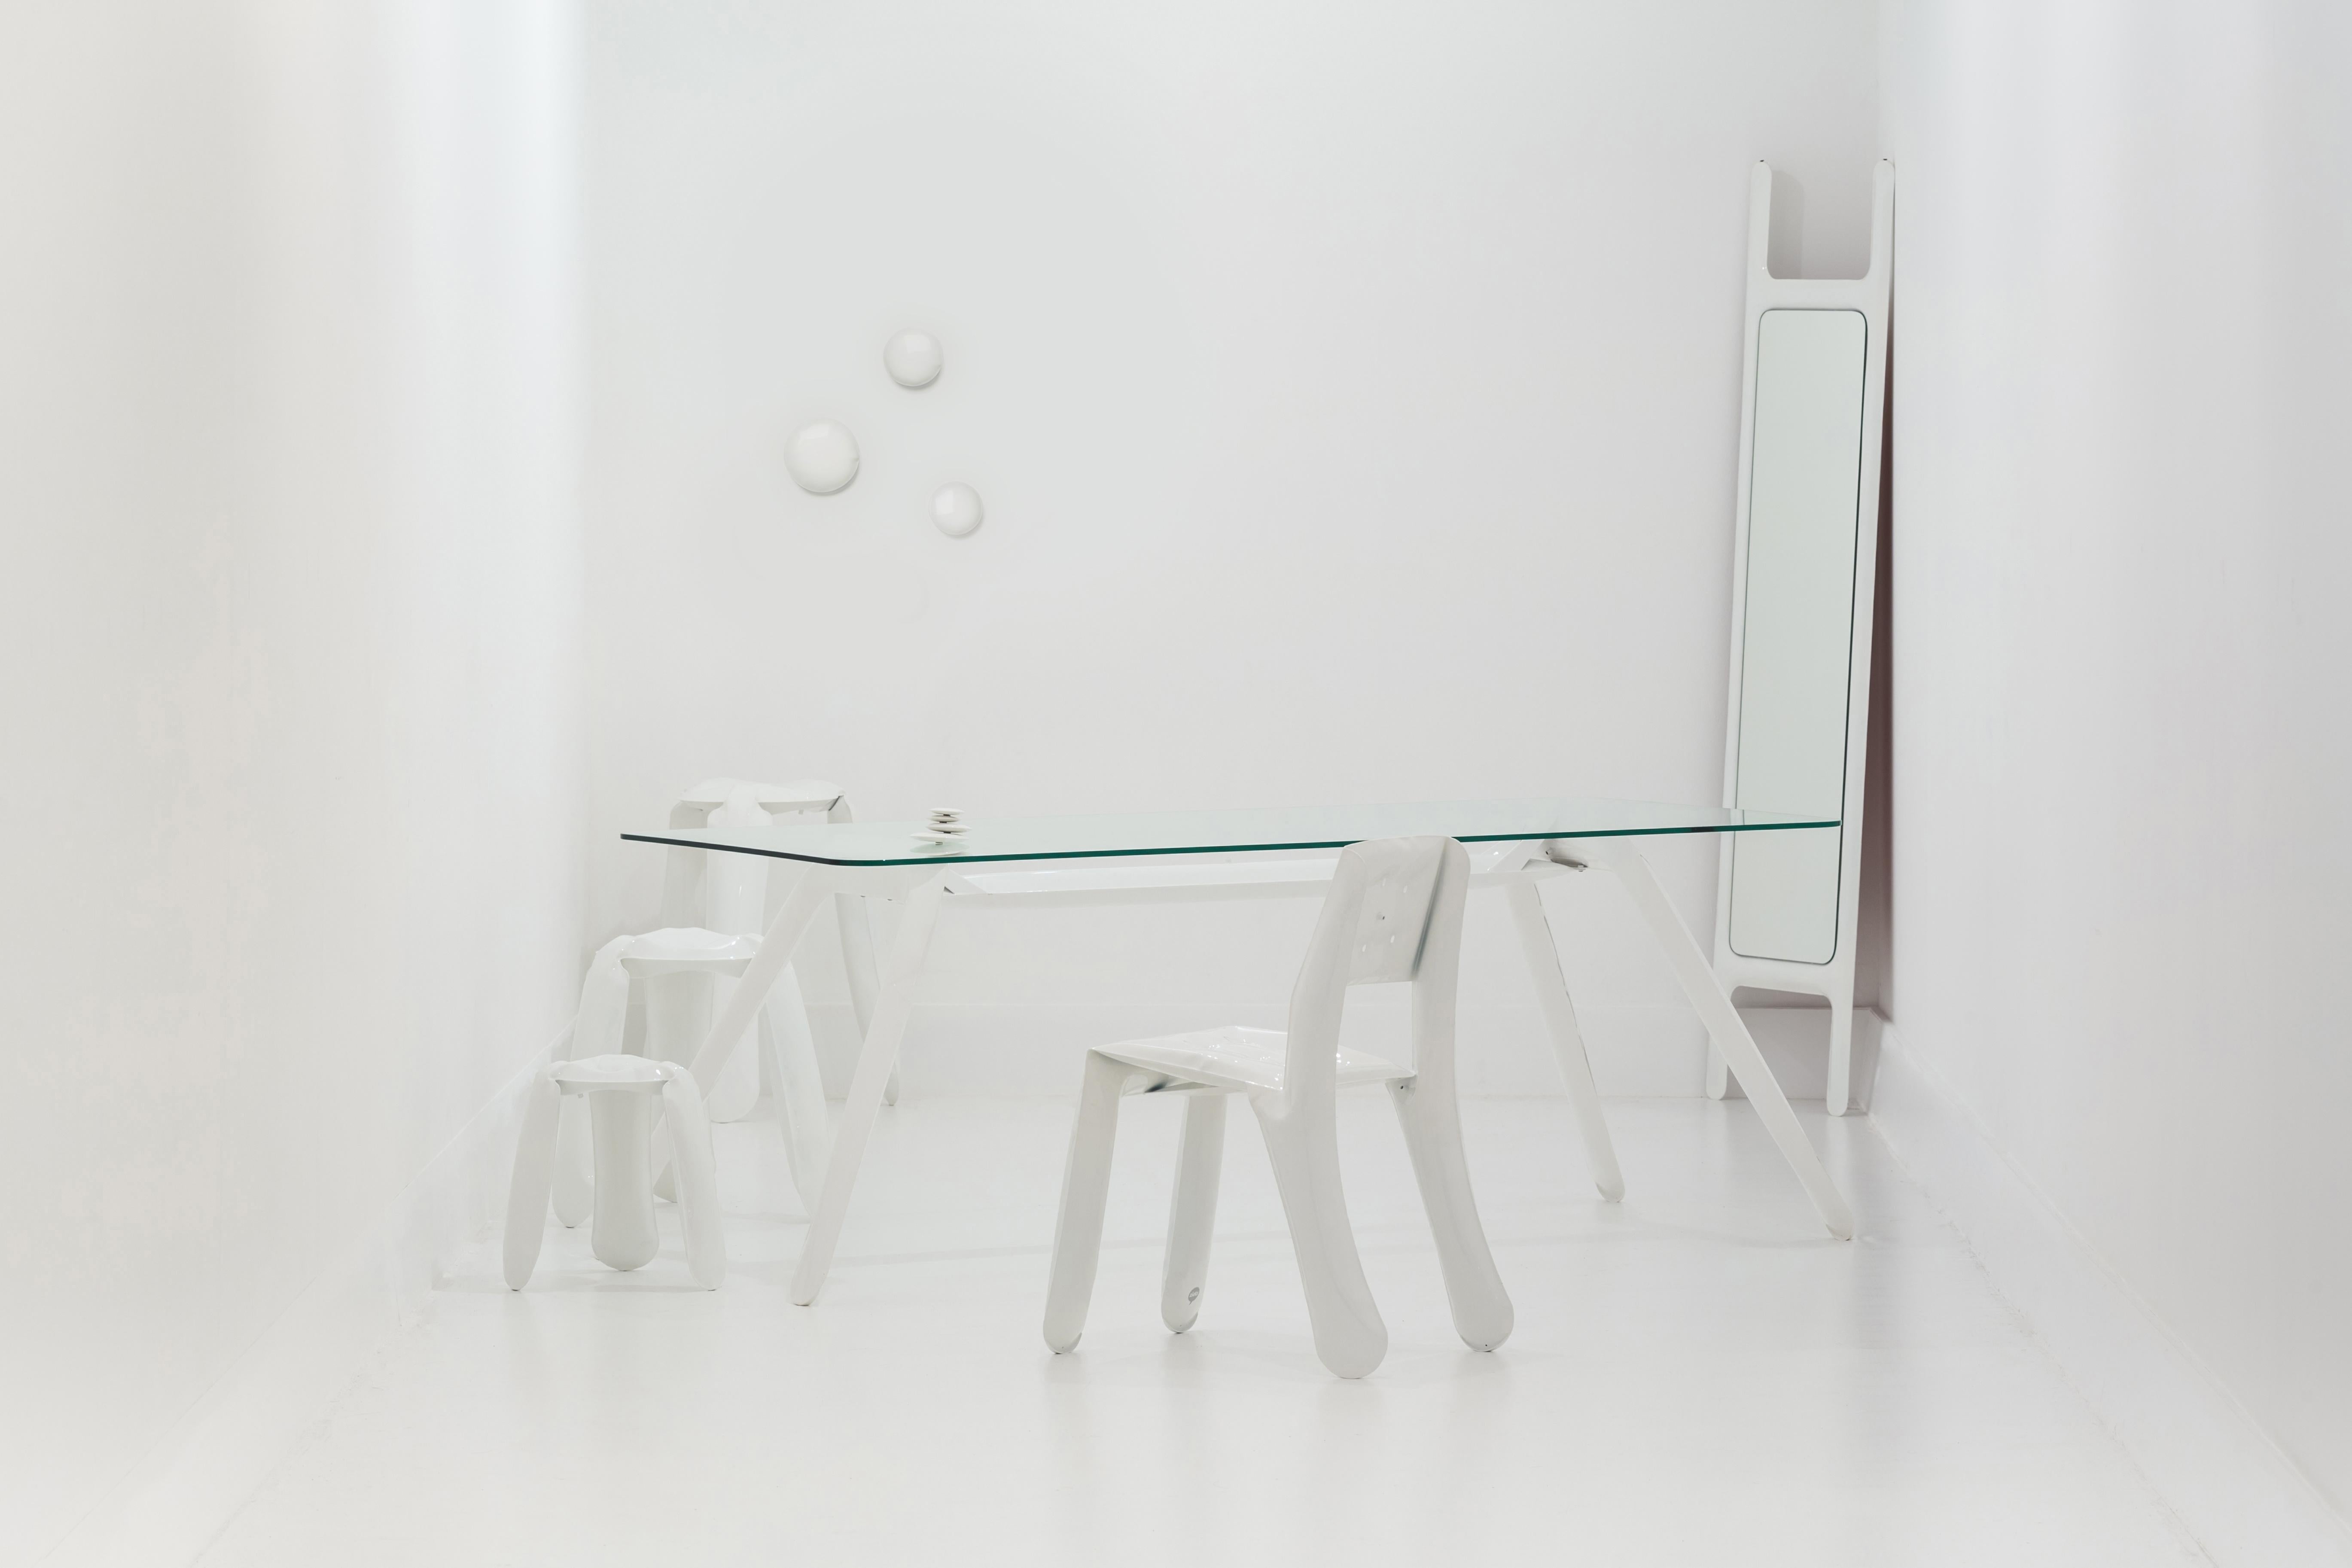 Drab mirror is a part of a drab ladder family, adding a new function to an elegant frame created with the use of FiDU technology. The inflation effect is not so obvious, yet it is well highlighted in the convexity of this simple form.

Available